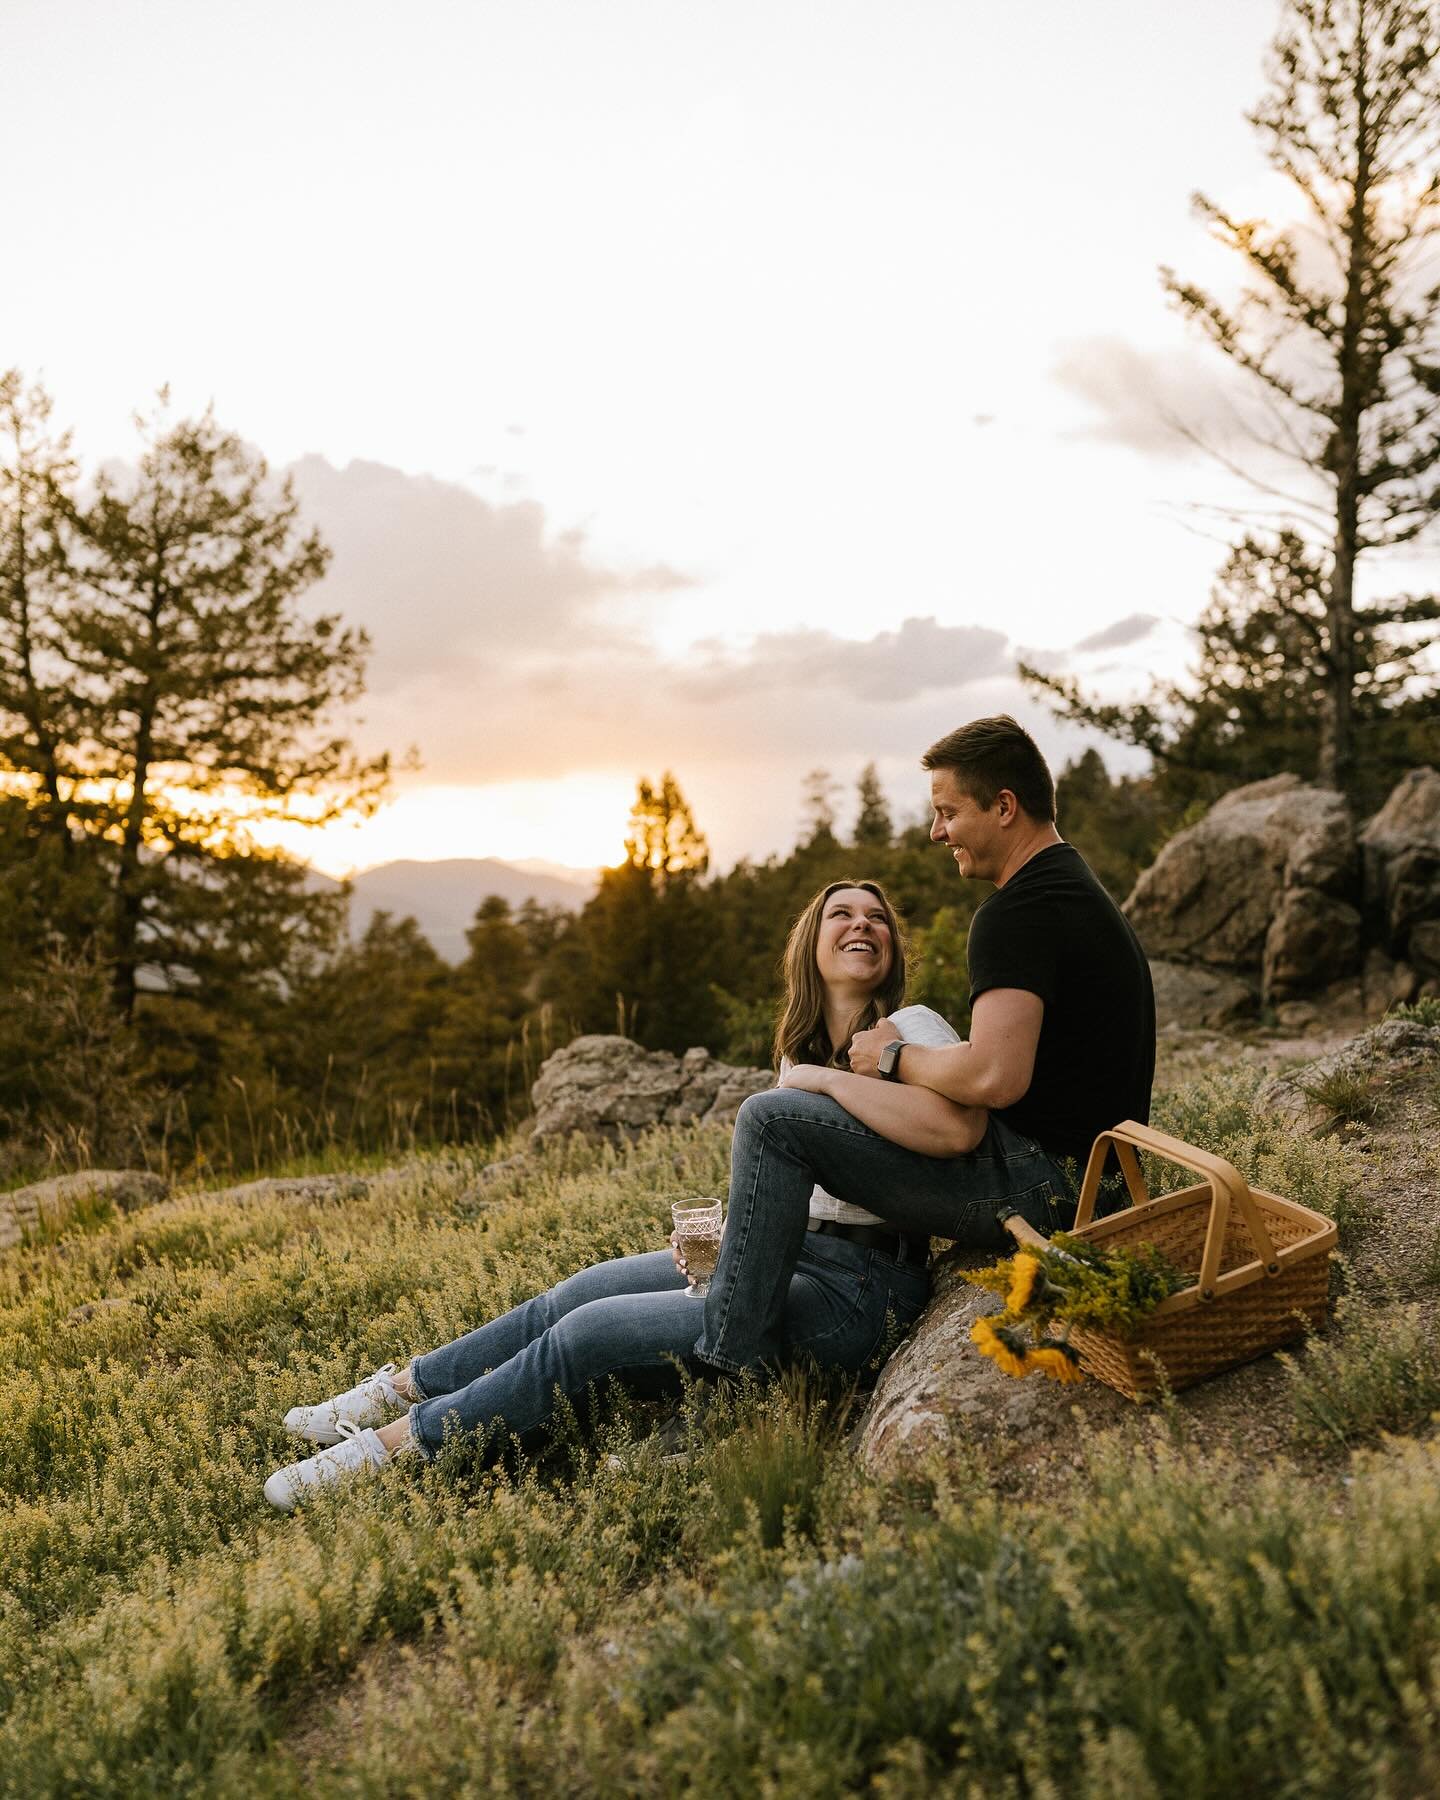 It&rsquo;s gonna be a good day
.
.
.
.
.
.
#engagementphotos #engagementinspiration #coloradoengagementphotographer #coloradoengagement #coloradophotographer #engagedincolorado #picnicphotoshoot #couplesshoot #mountainengagement